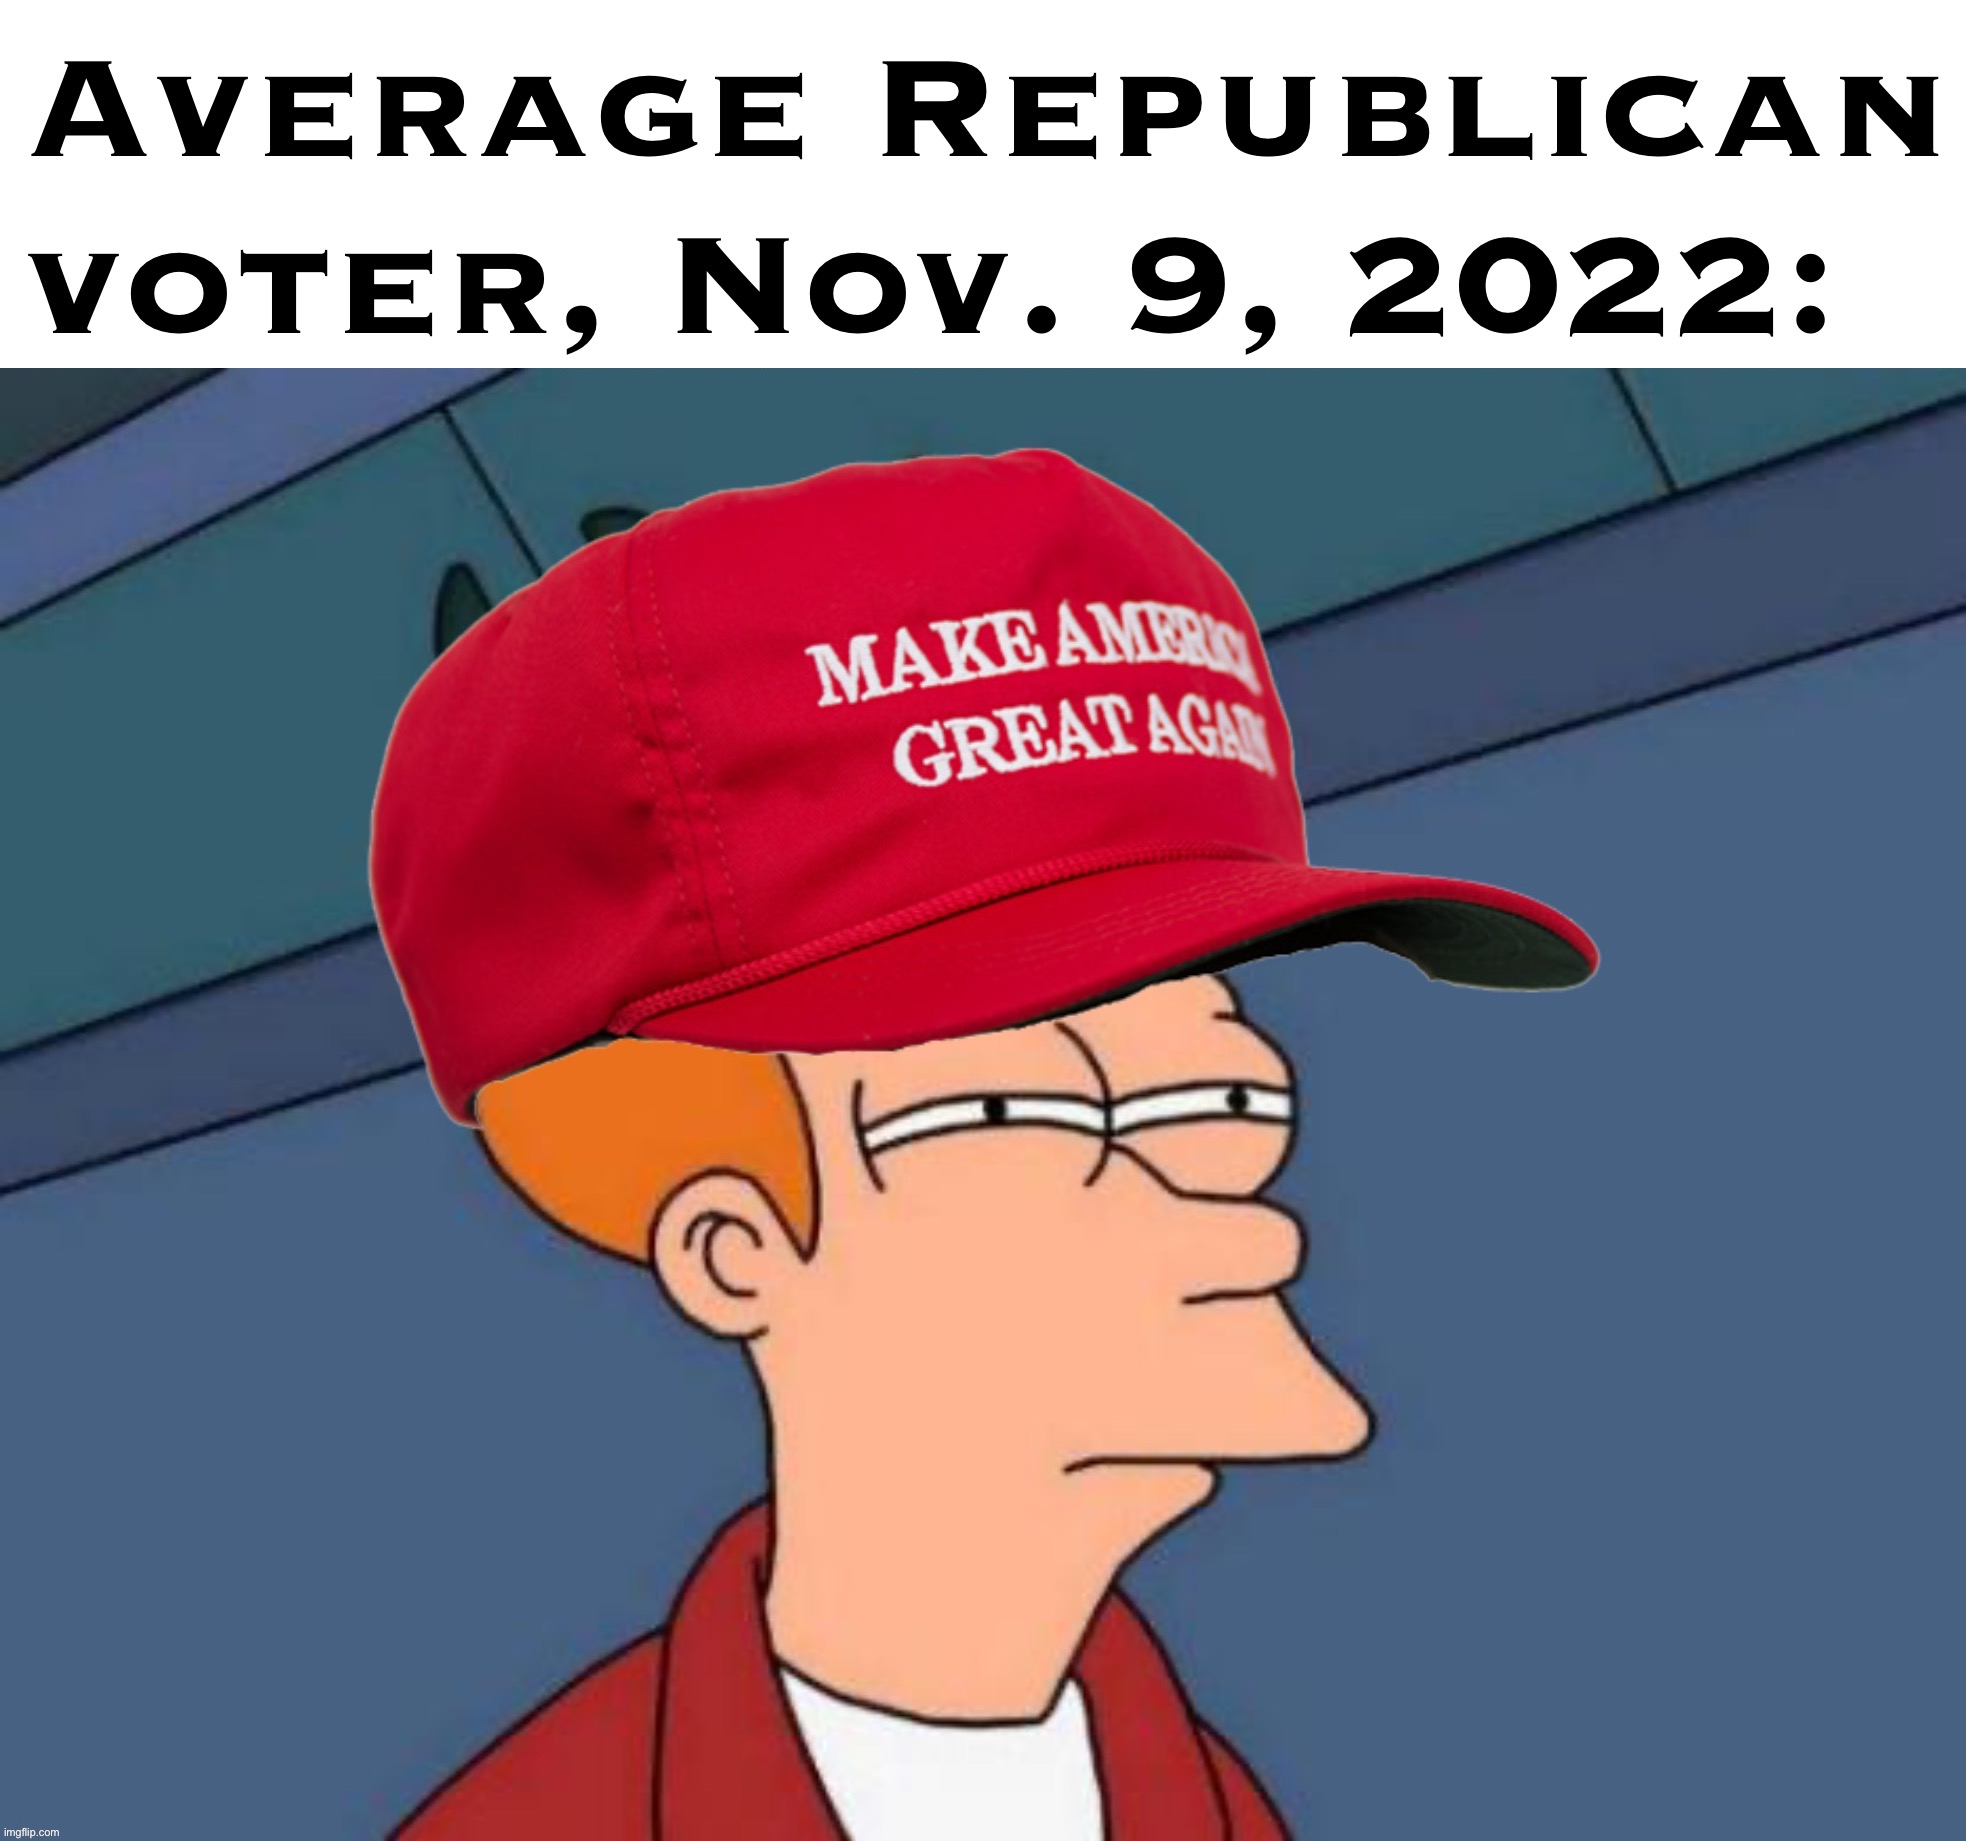 I ordered a red wave. Where’s my red wave? Can I speak to the manager? | Average Republican voter, Nov. 9, 2022: | image tagged in maga futurama fry,midterms,republicans,2022,the day after,election day | made w/ Imgflip meme maker